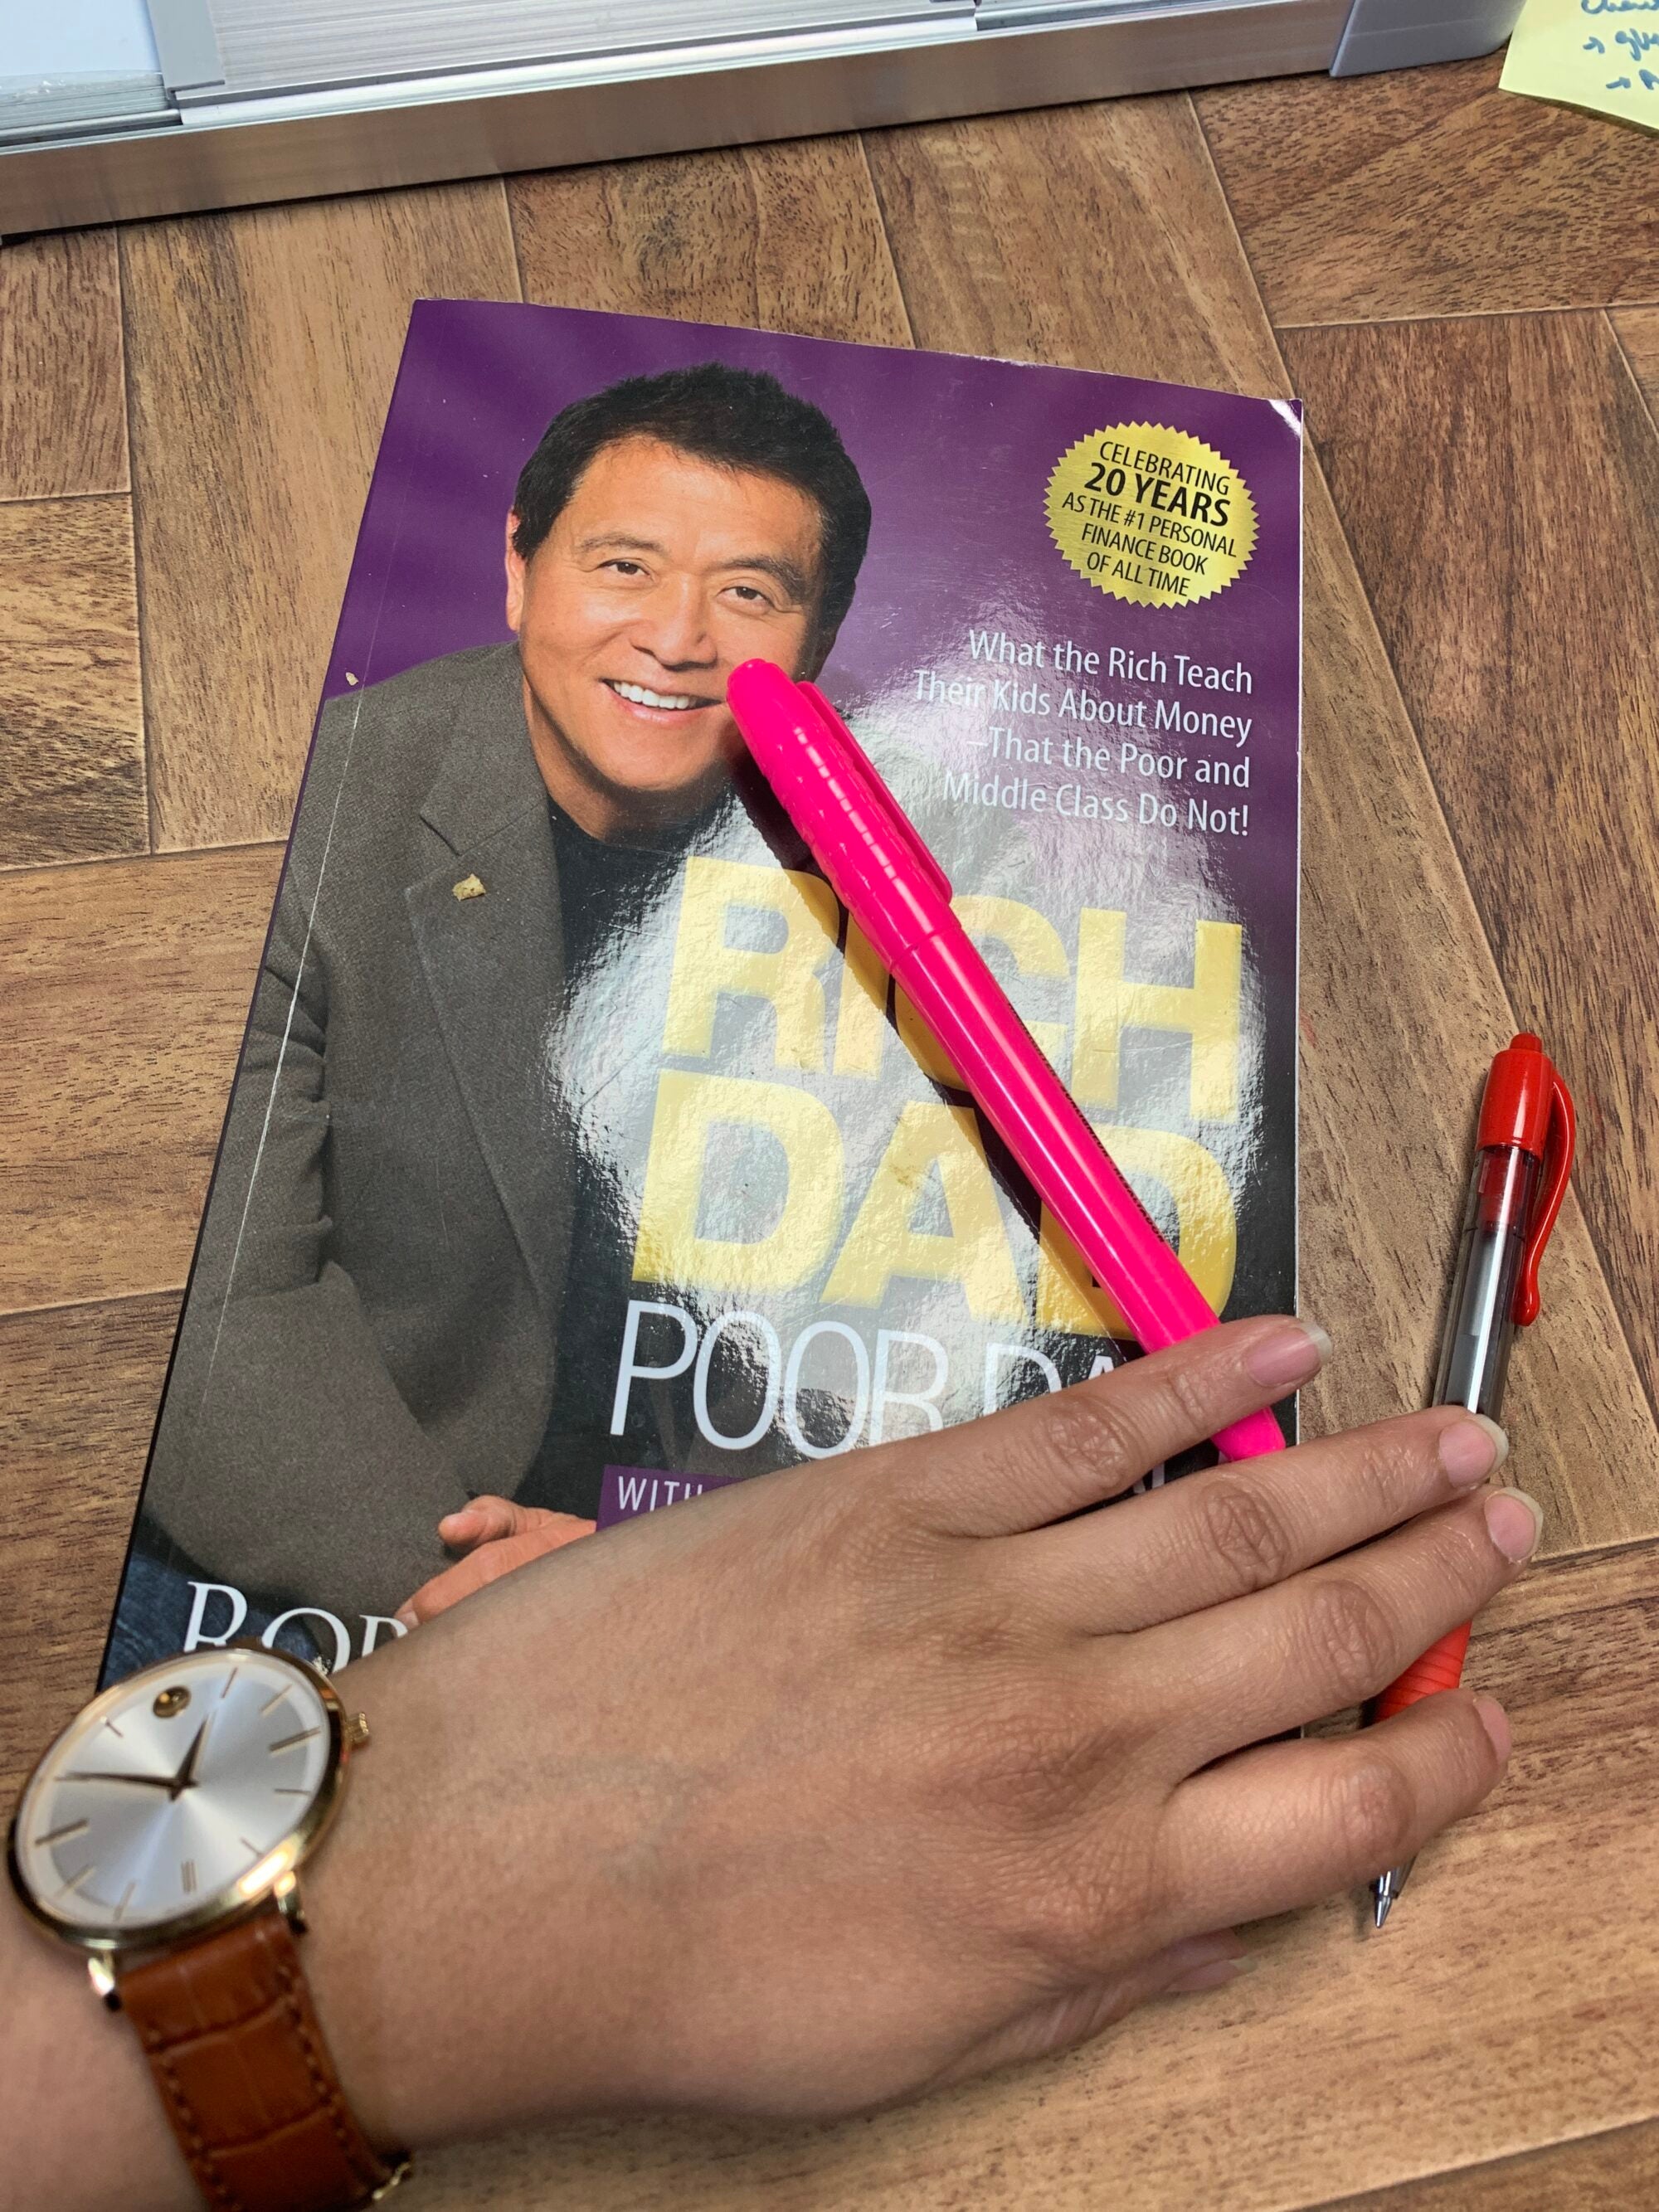 A hand on the book "Rich dad, poor dad"